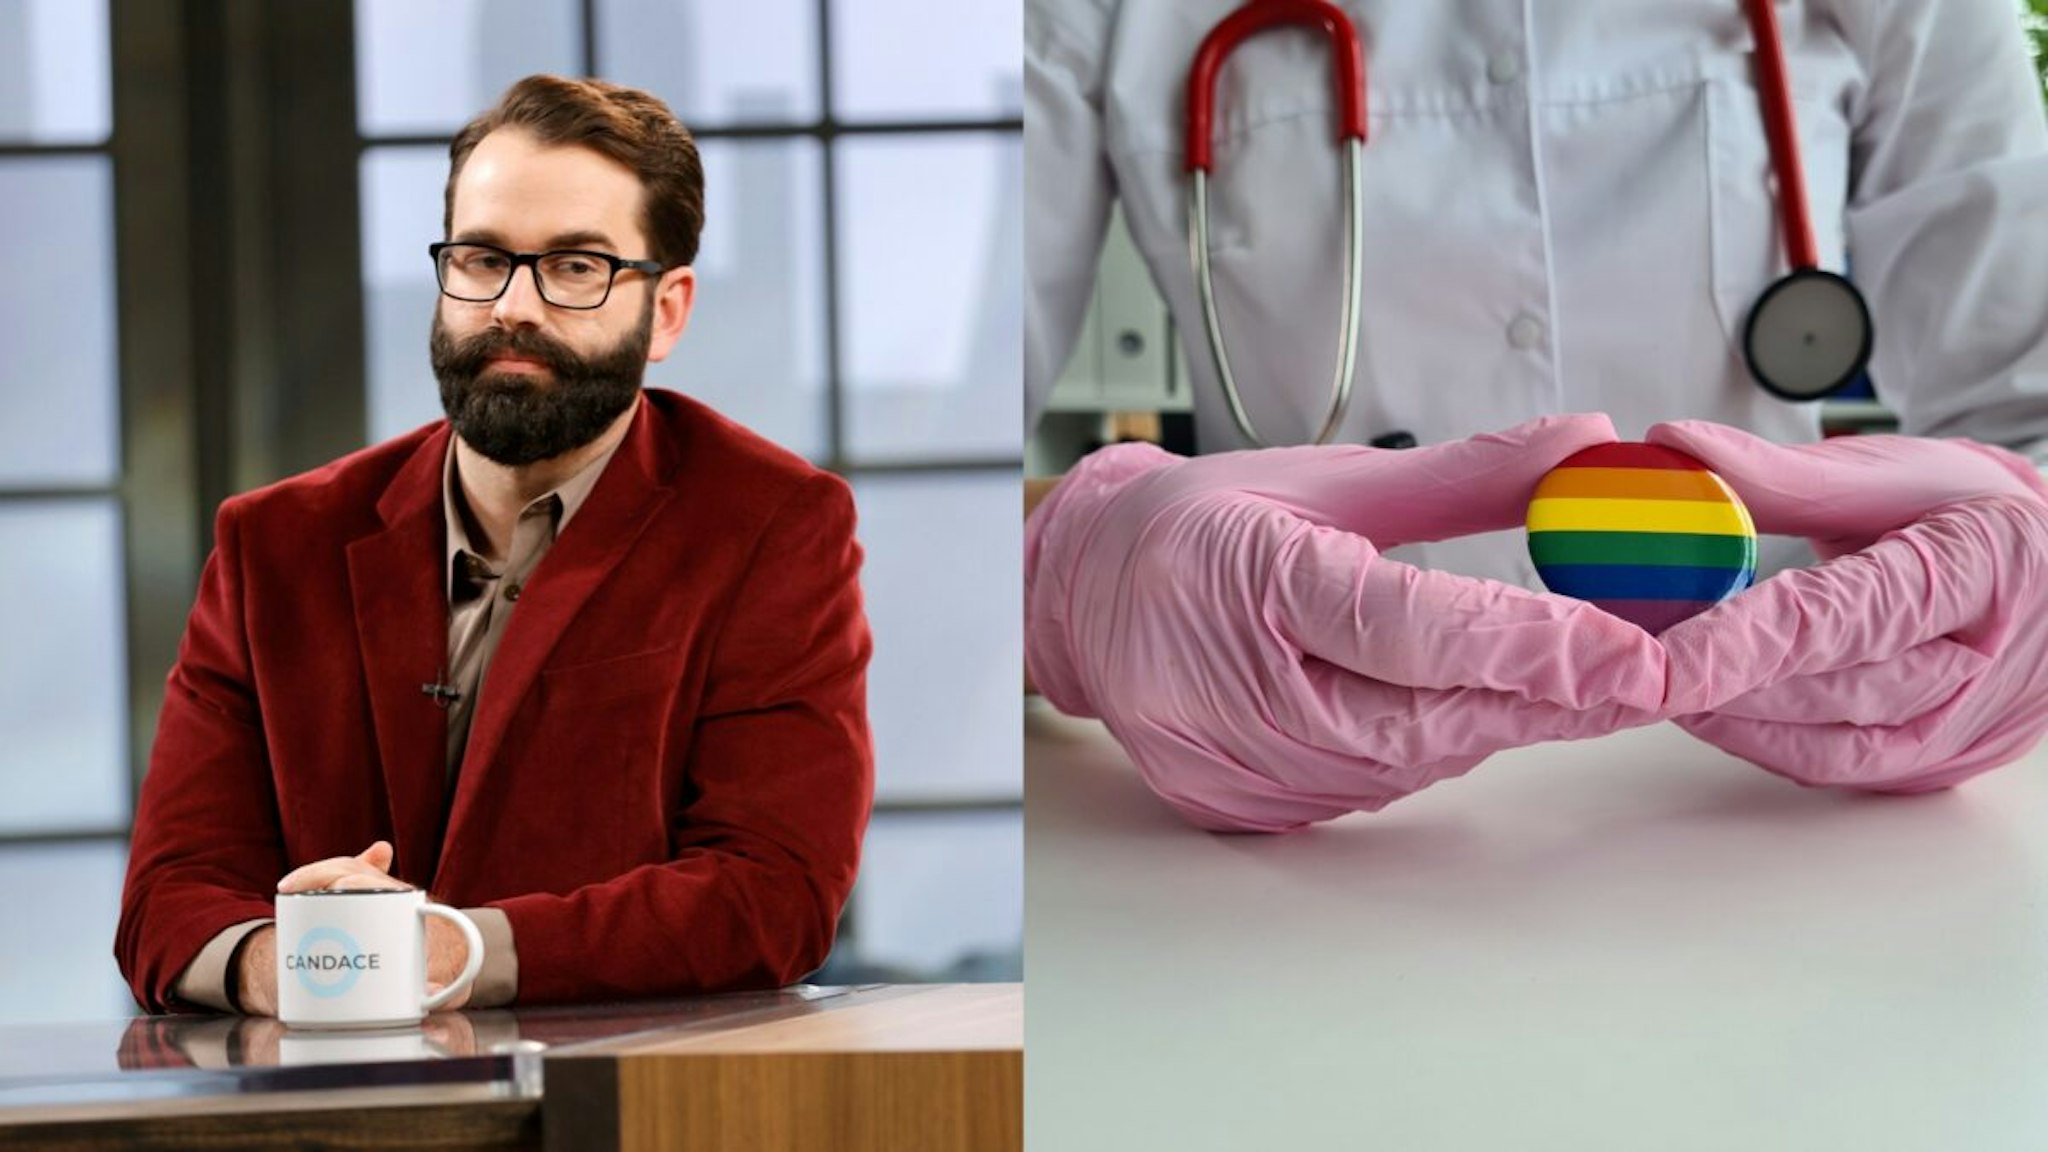 Matt Walsh is seen on set of "Candace" on March 31, 2021 in Nashville, Tennessee./Transgender LGBT symbol stethoscope with rainbow icon for rights and gender equality. Medical care insurance and doctor